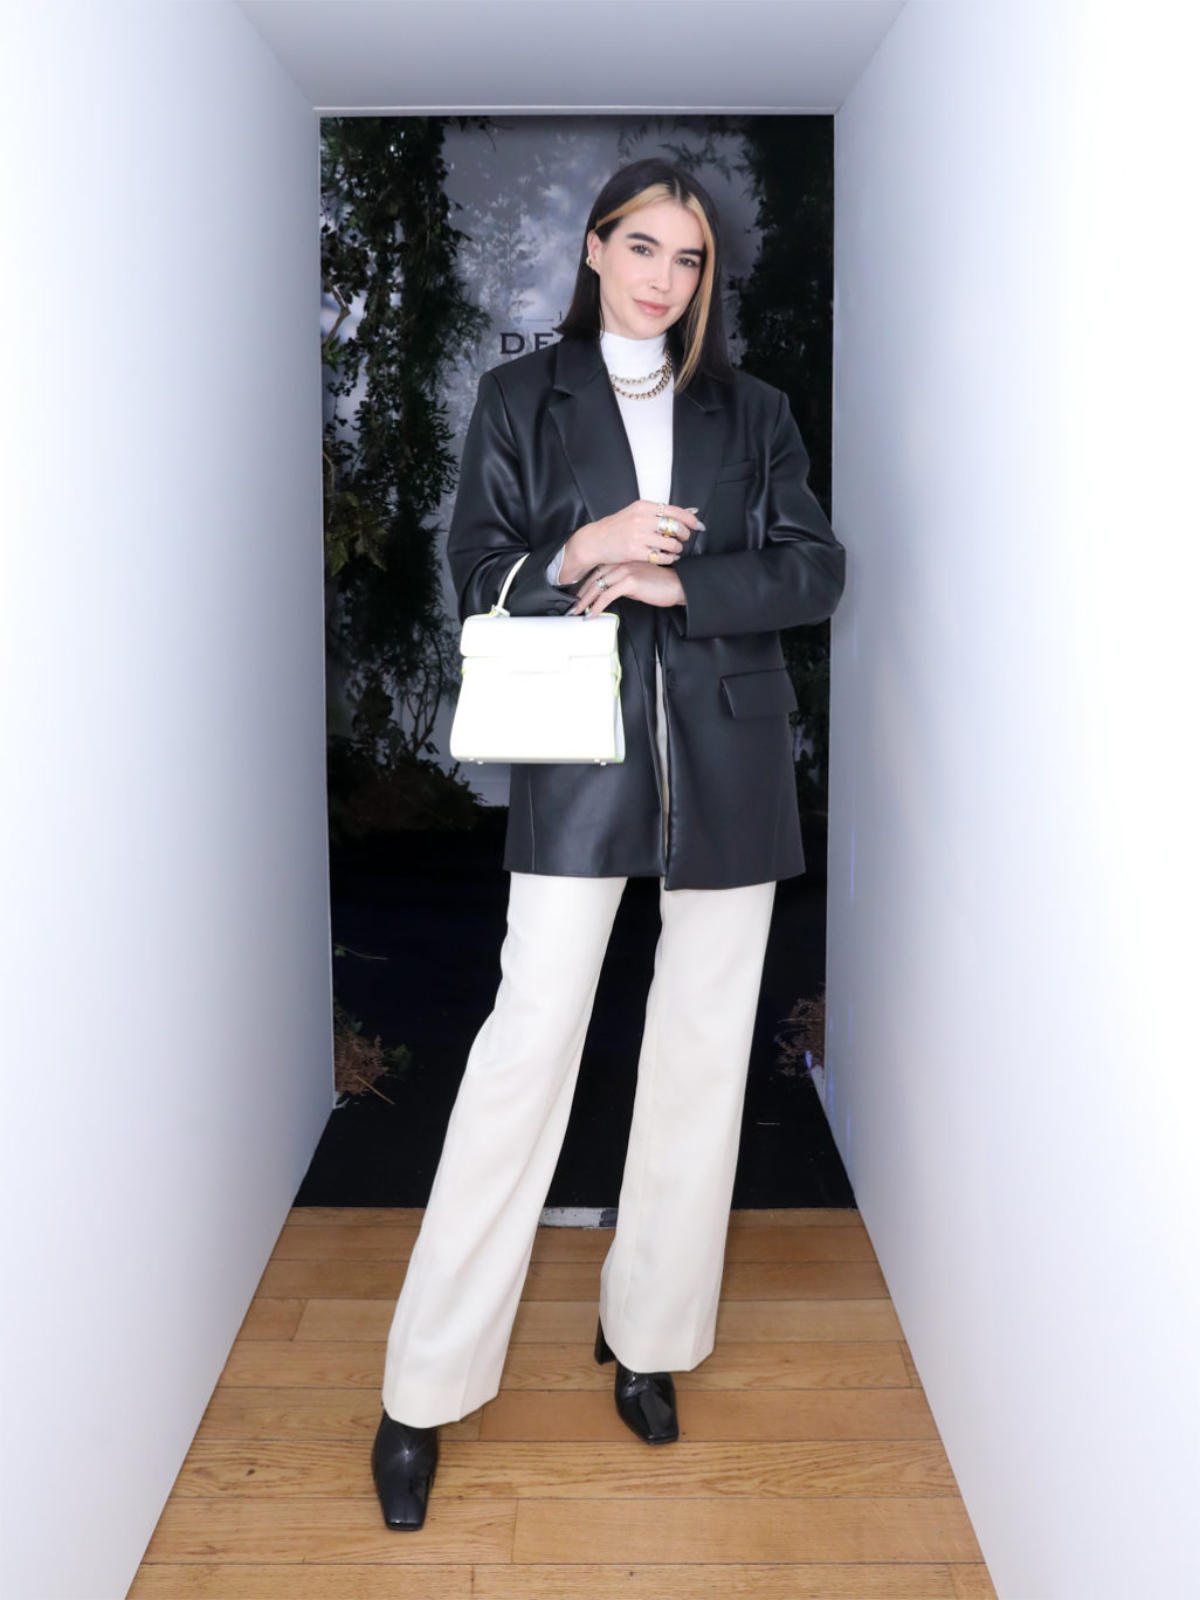 Delvaux - Anouck Lepere and Delvaux Creative Director Christina Zeller